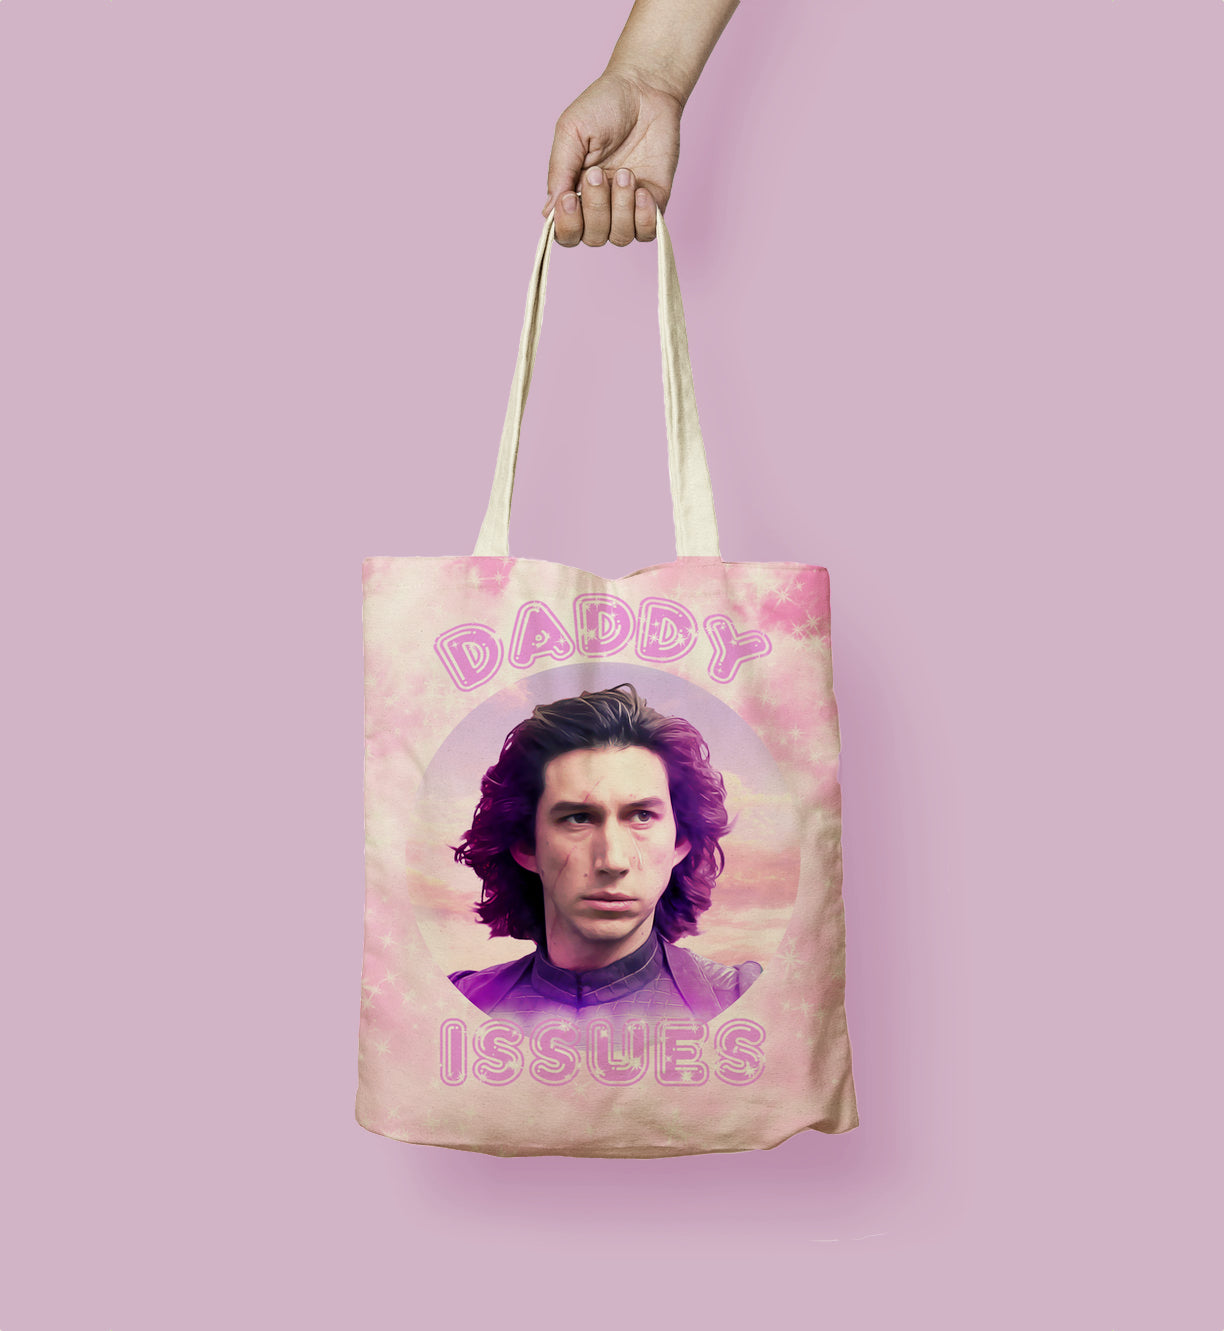 Adam Driver "Daddy Issues" Tote Bag